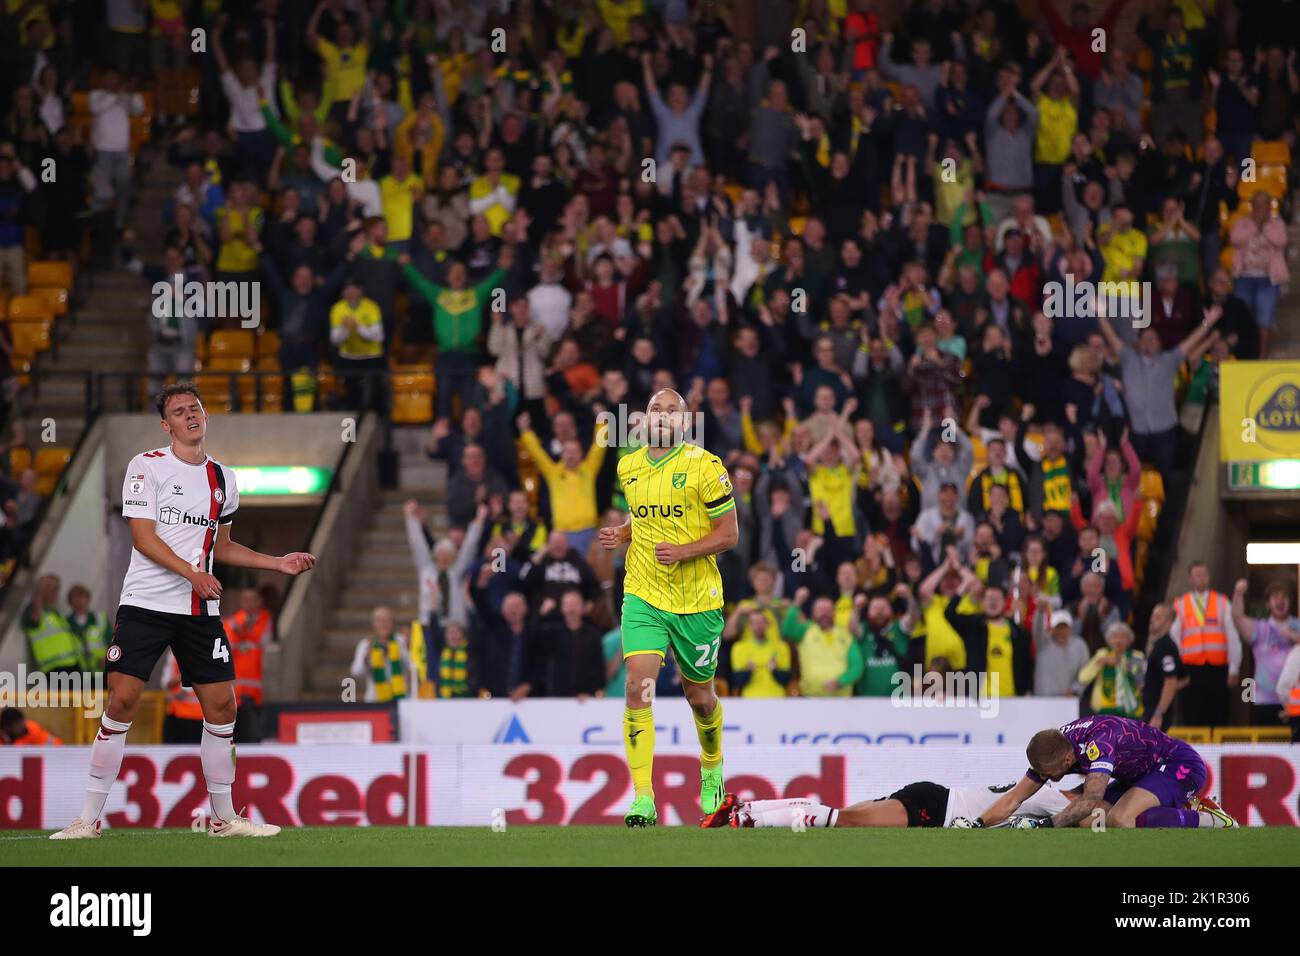 Teemu Pukki of Norwich City celebrates after scoring a goal to make it 2-0 - Norwich City v Bristol City, Sky Bet Championship, Carrow Road, Norwich, UK - 14th September 2022  Editorial Use Only - DataCo restrictions apply Stock Photo